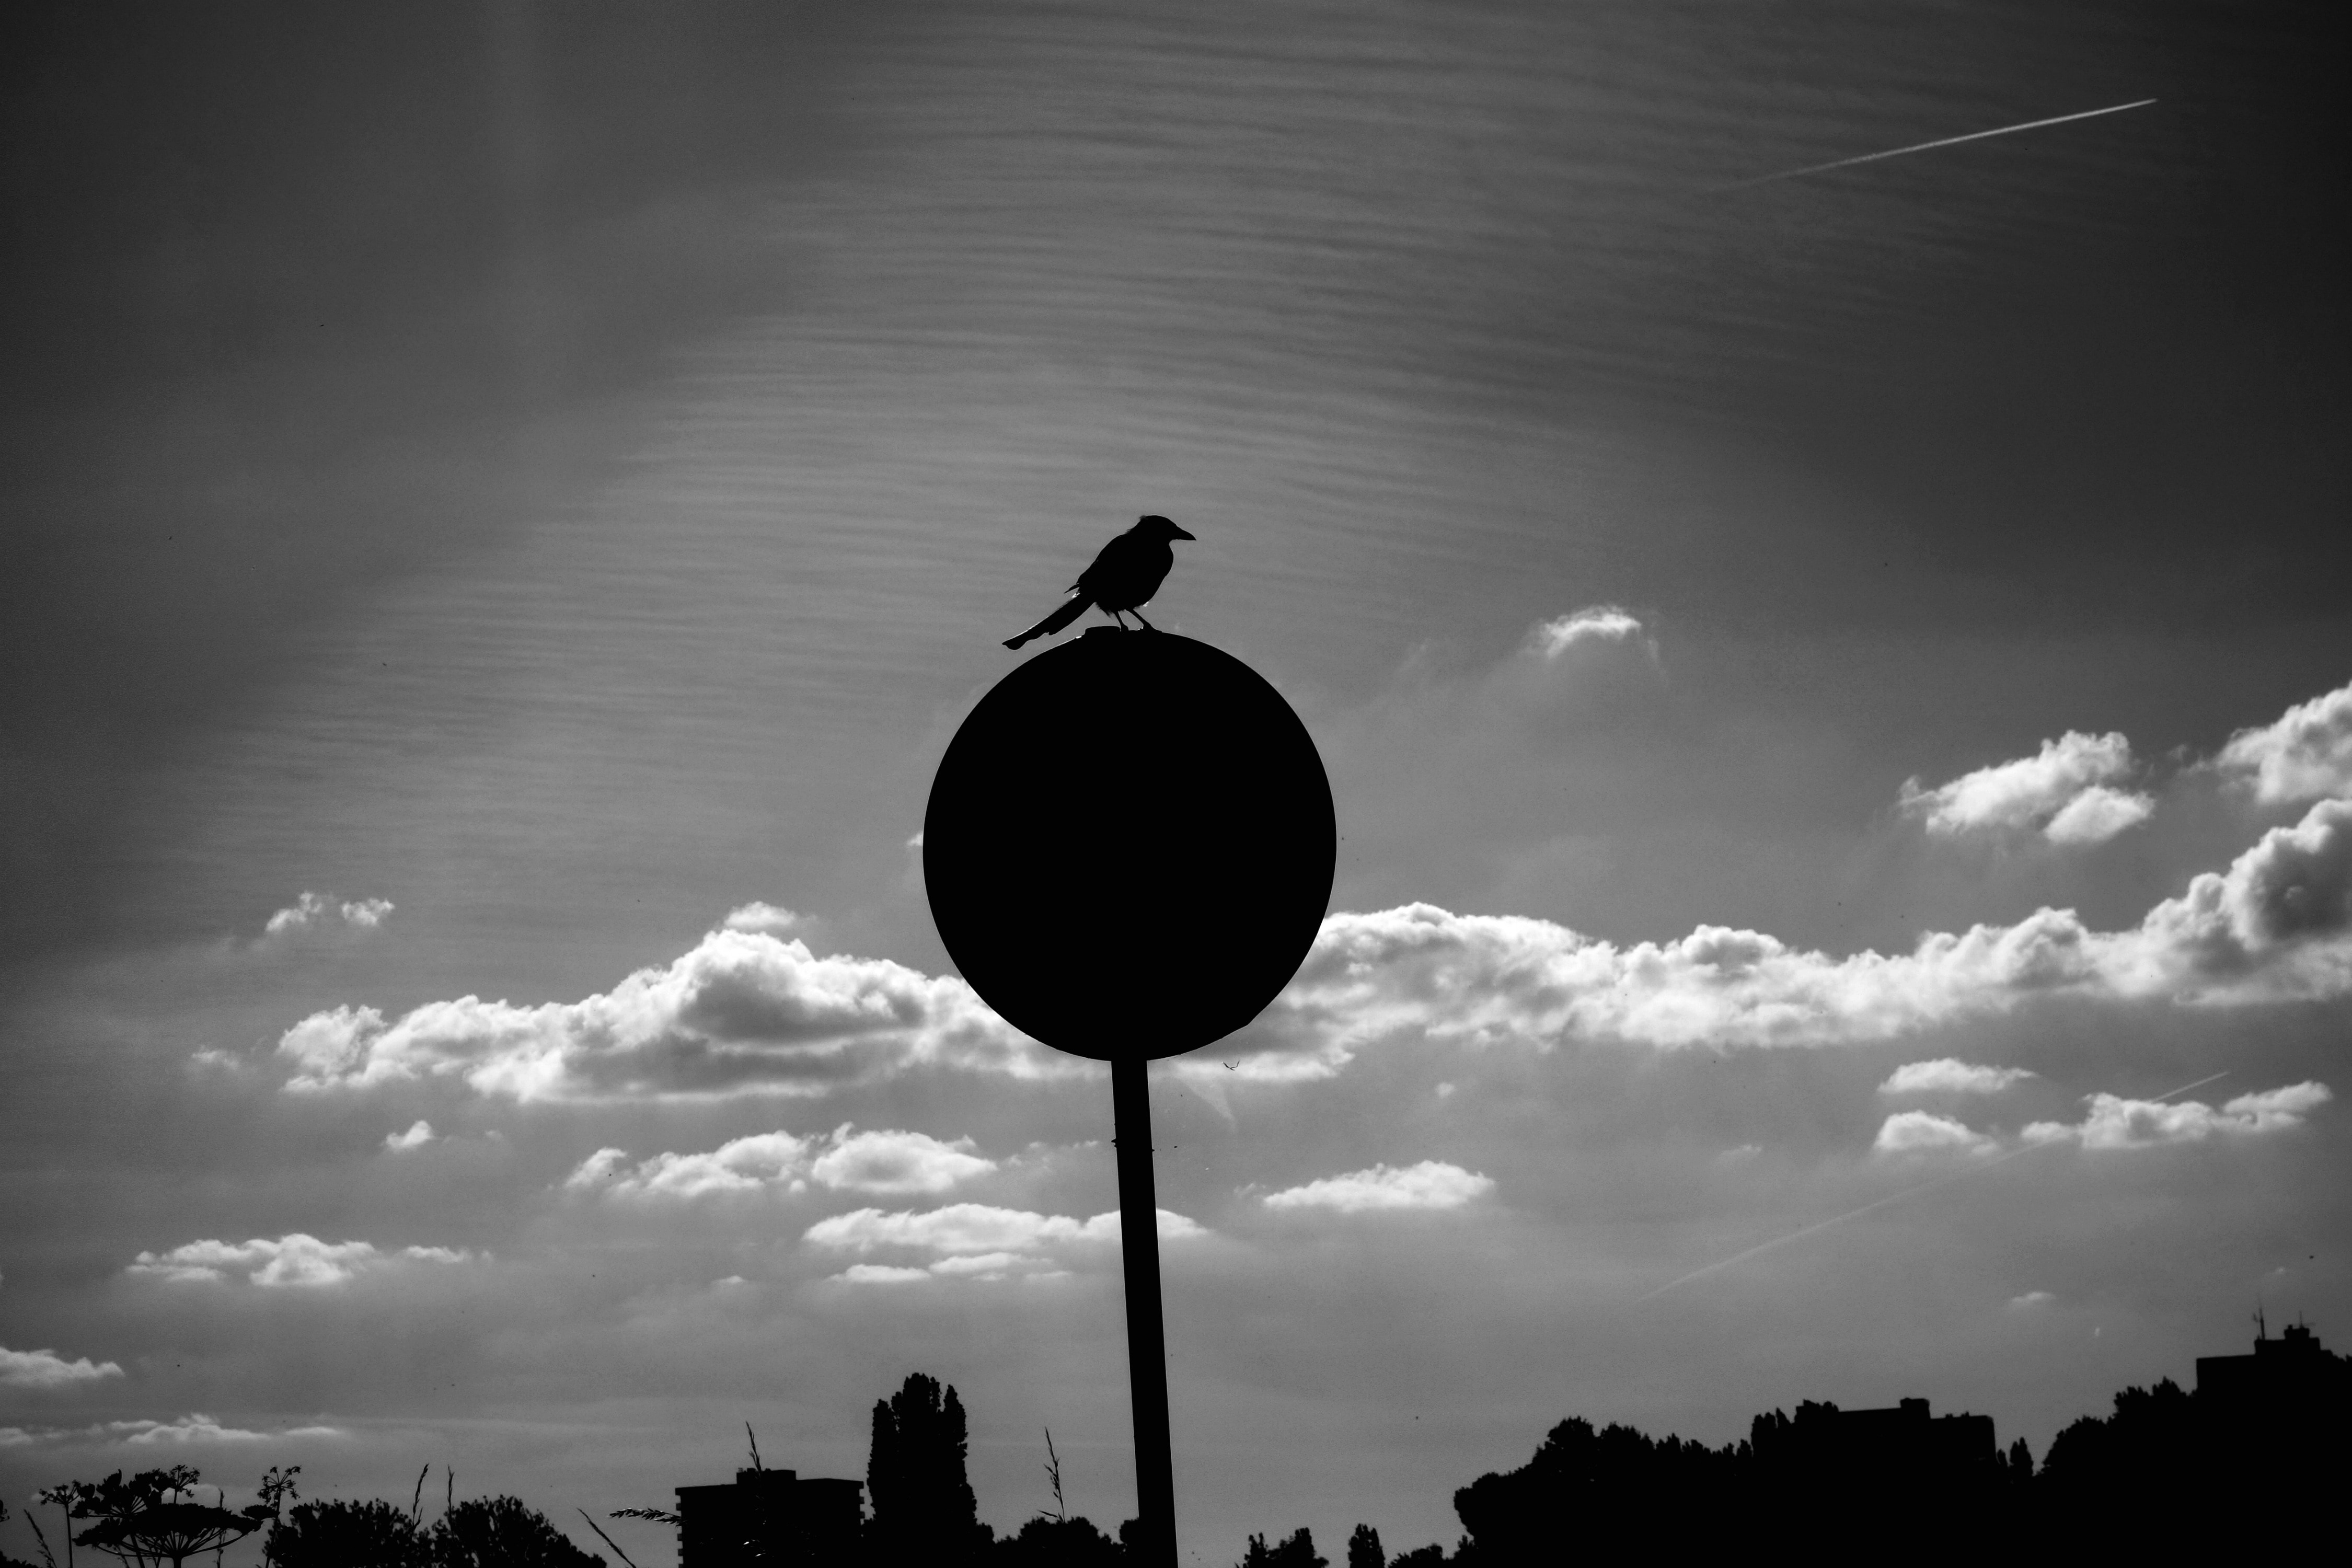 silhouette photography of pedestal signage and bird under cloudy sky